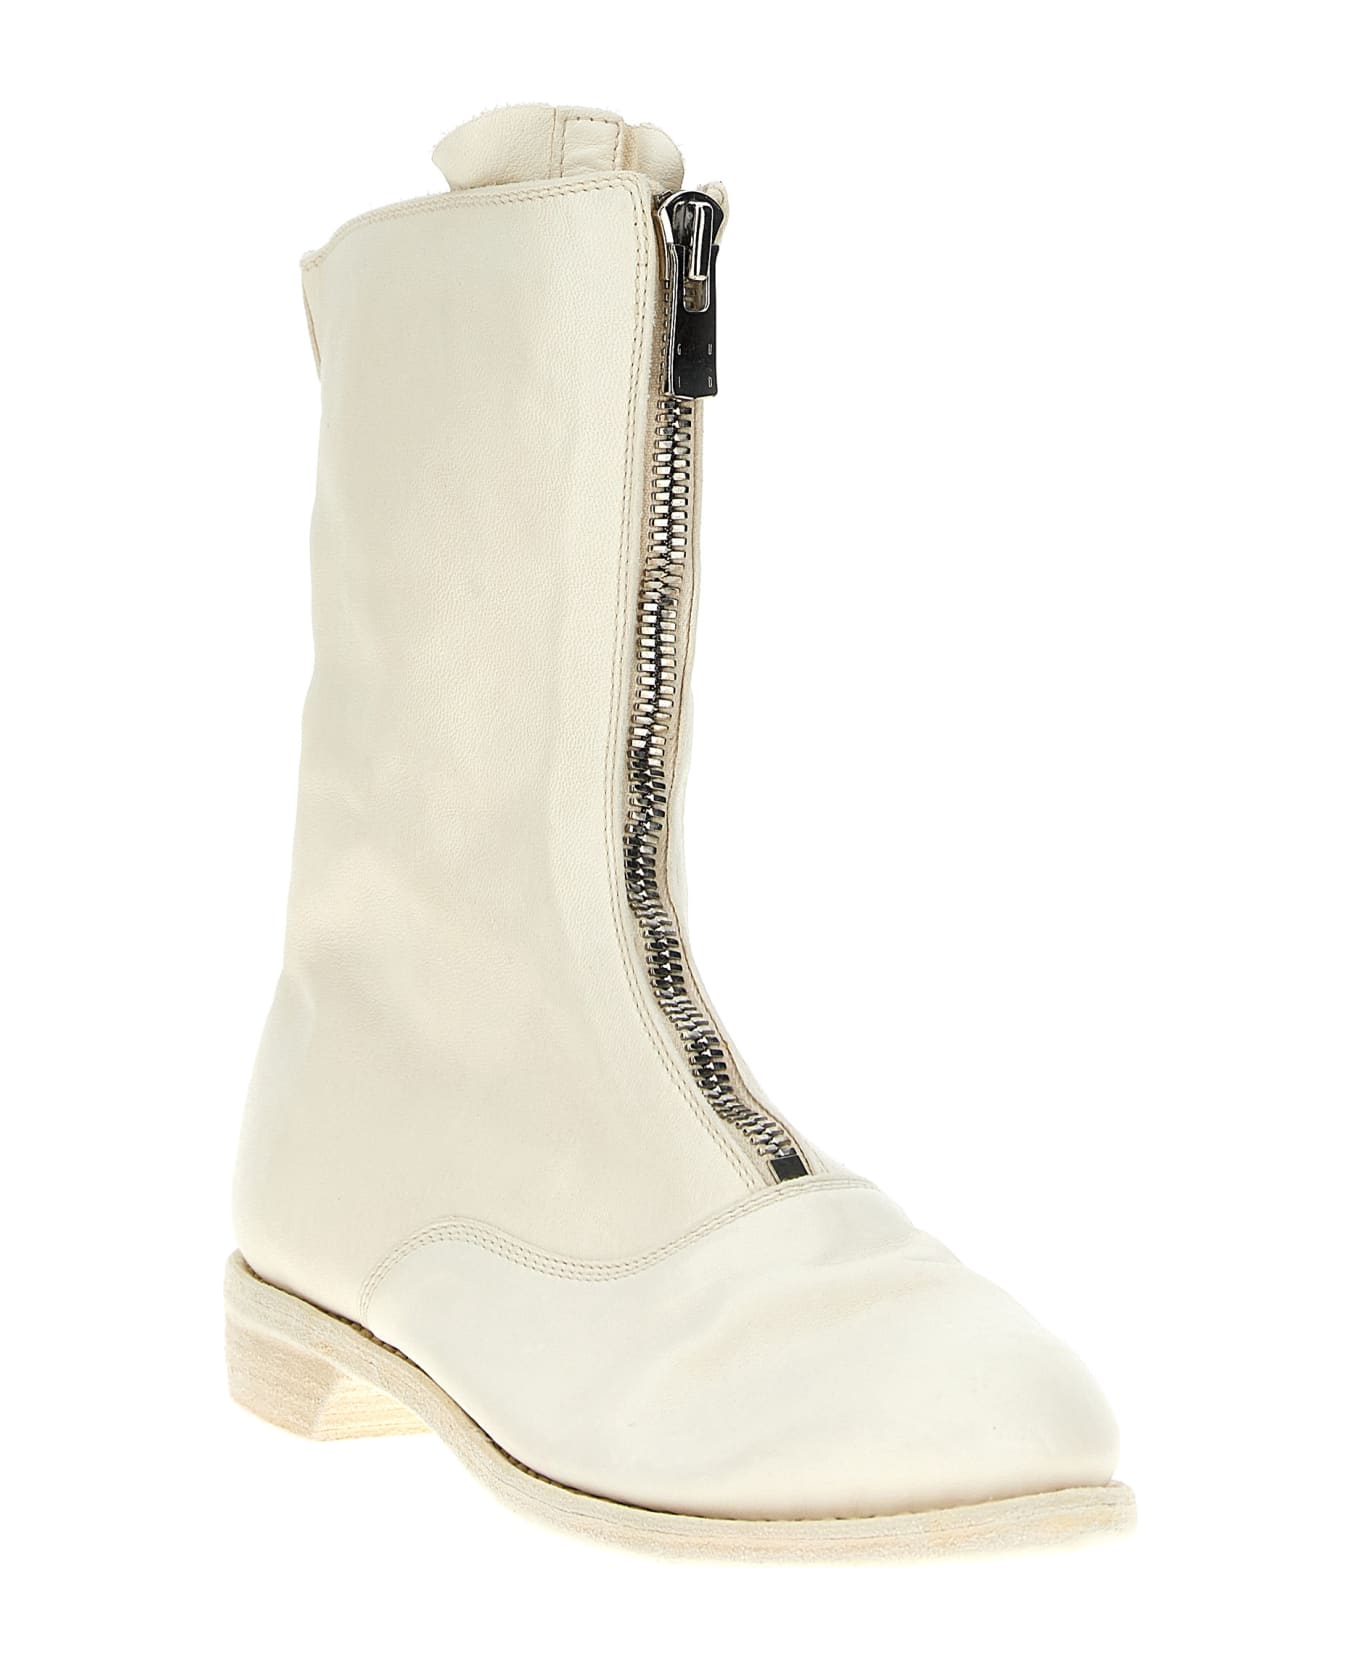 Guidi '310' Ankle Boots - White ブーツ